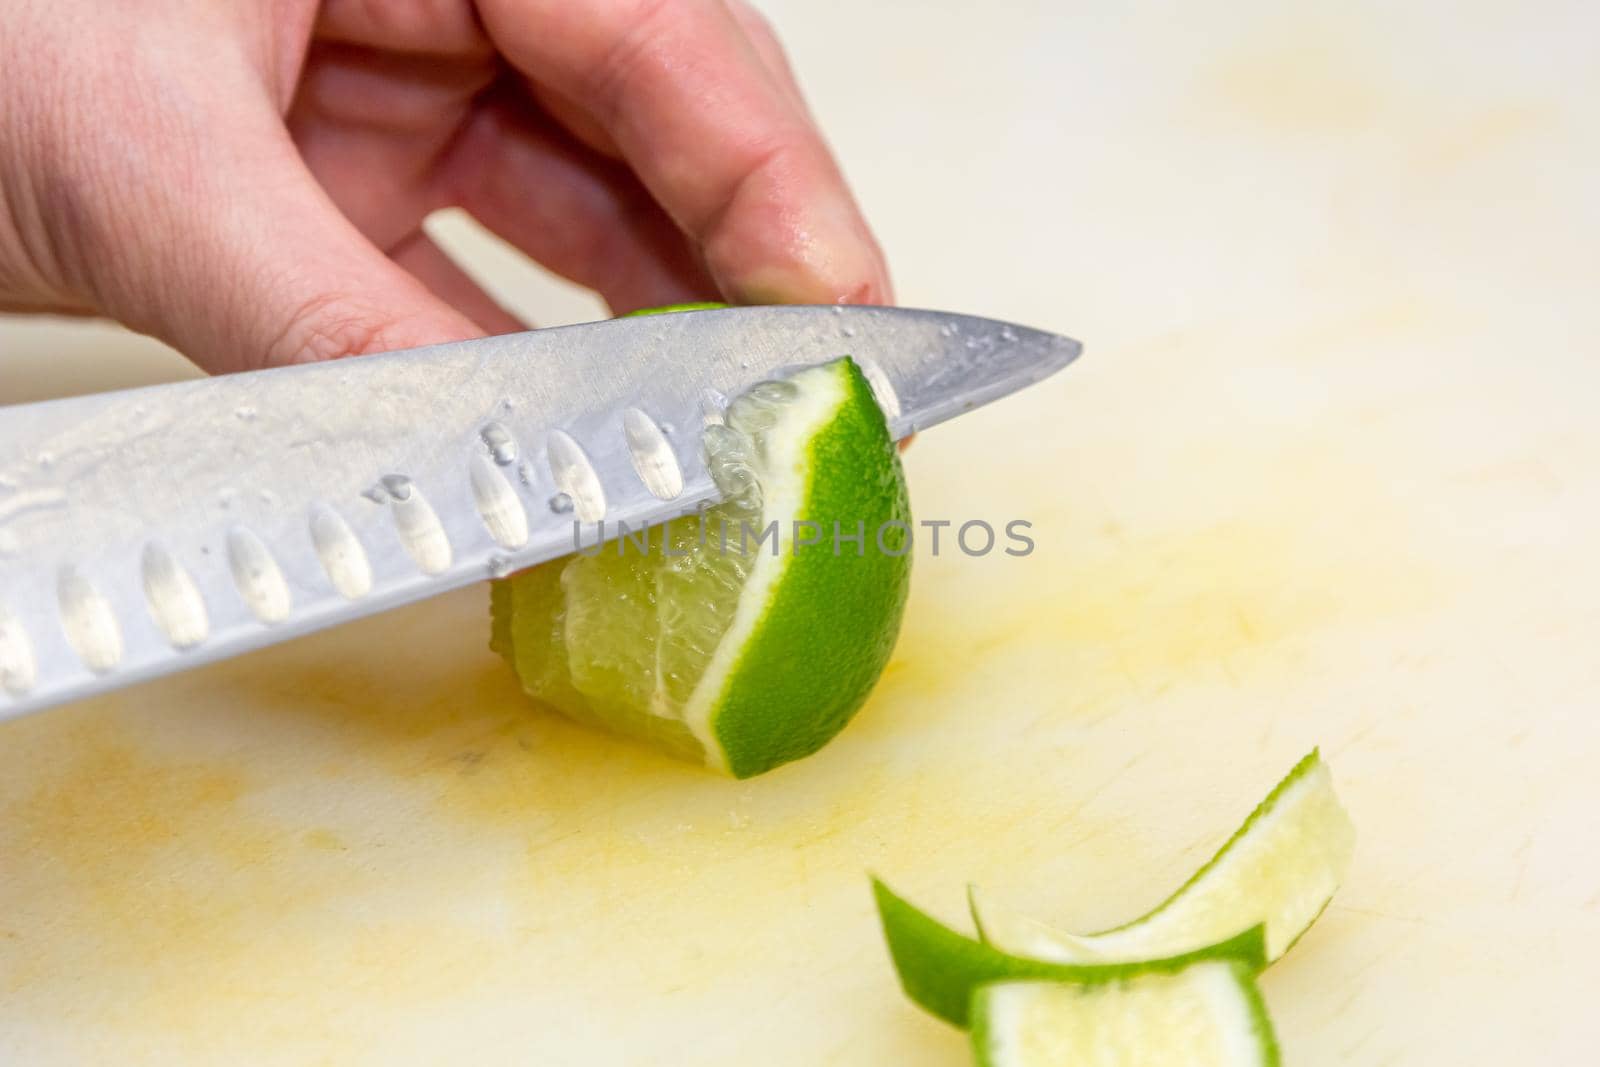 The chef cuts the skin from the lime with a knife on a white board by Milanchikov